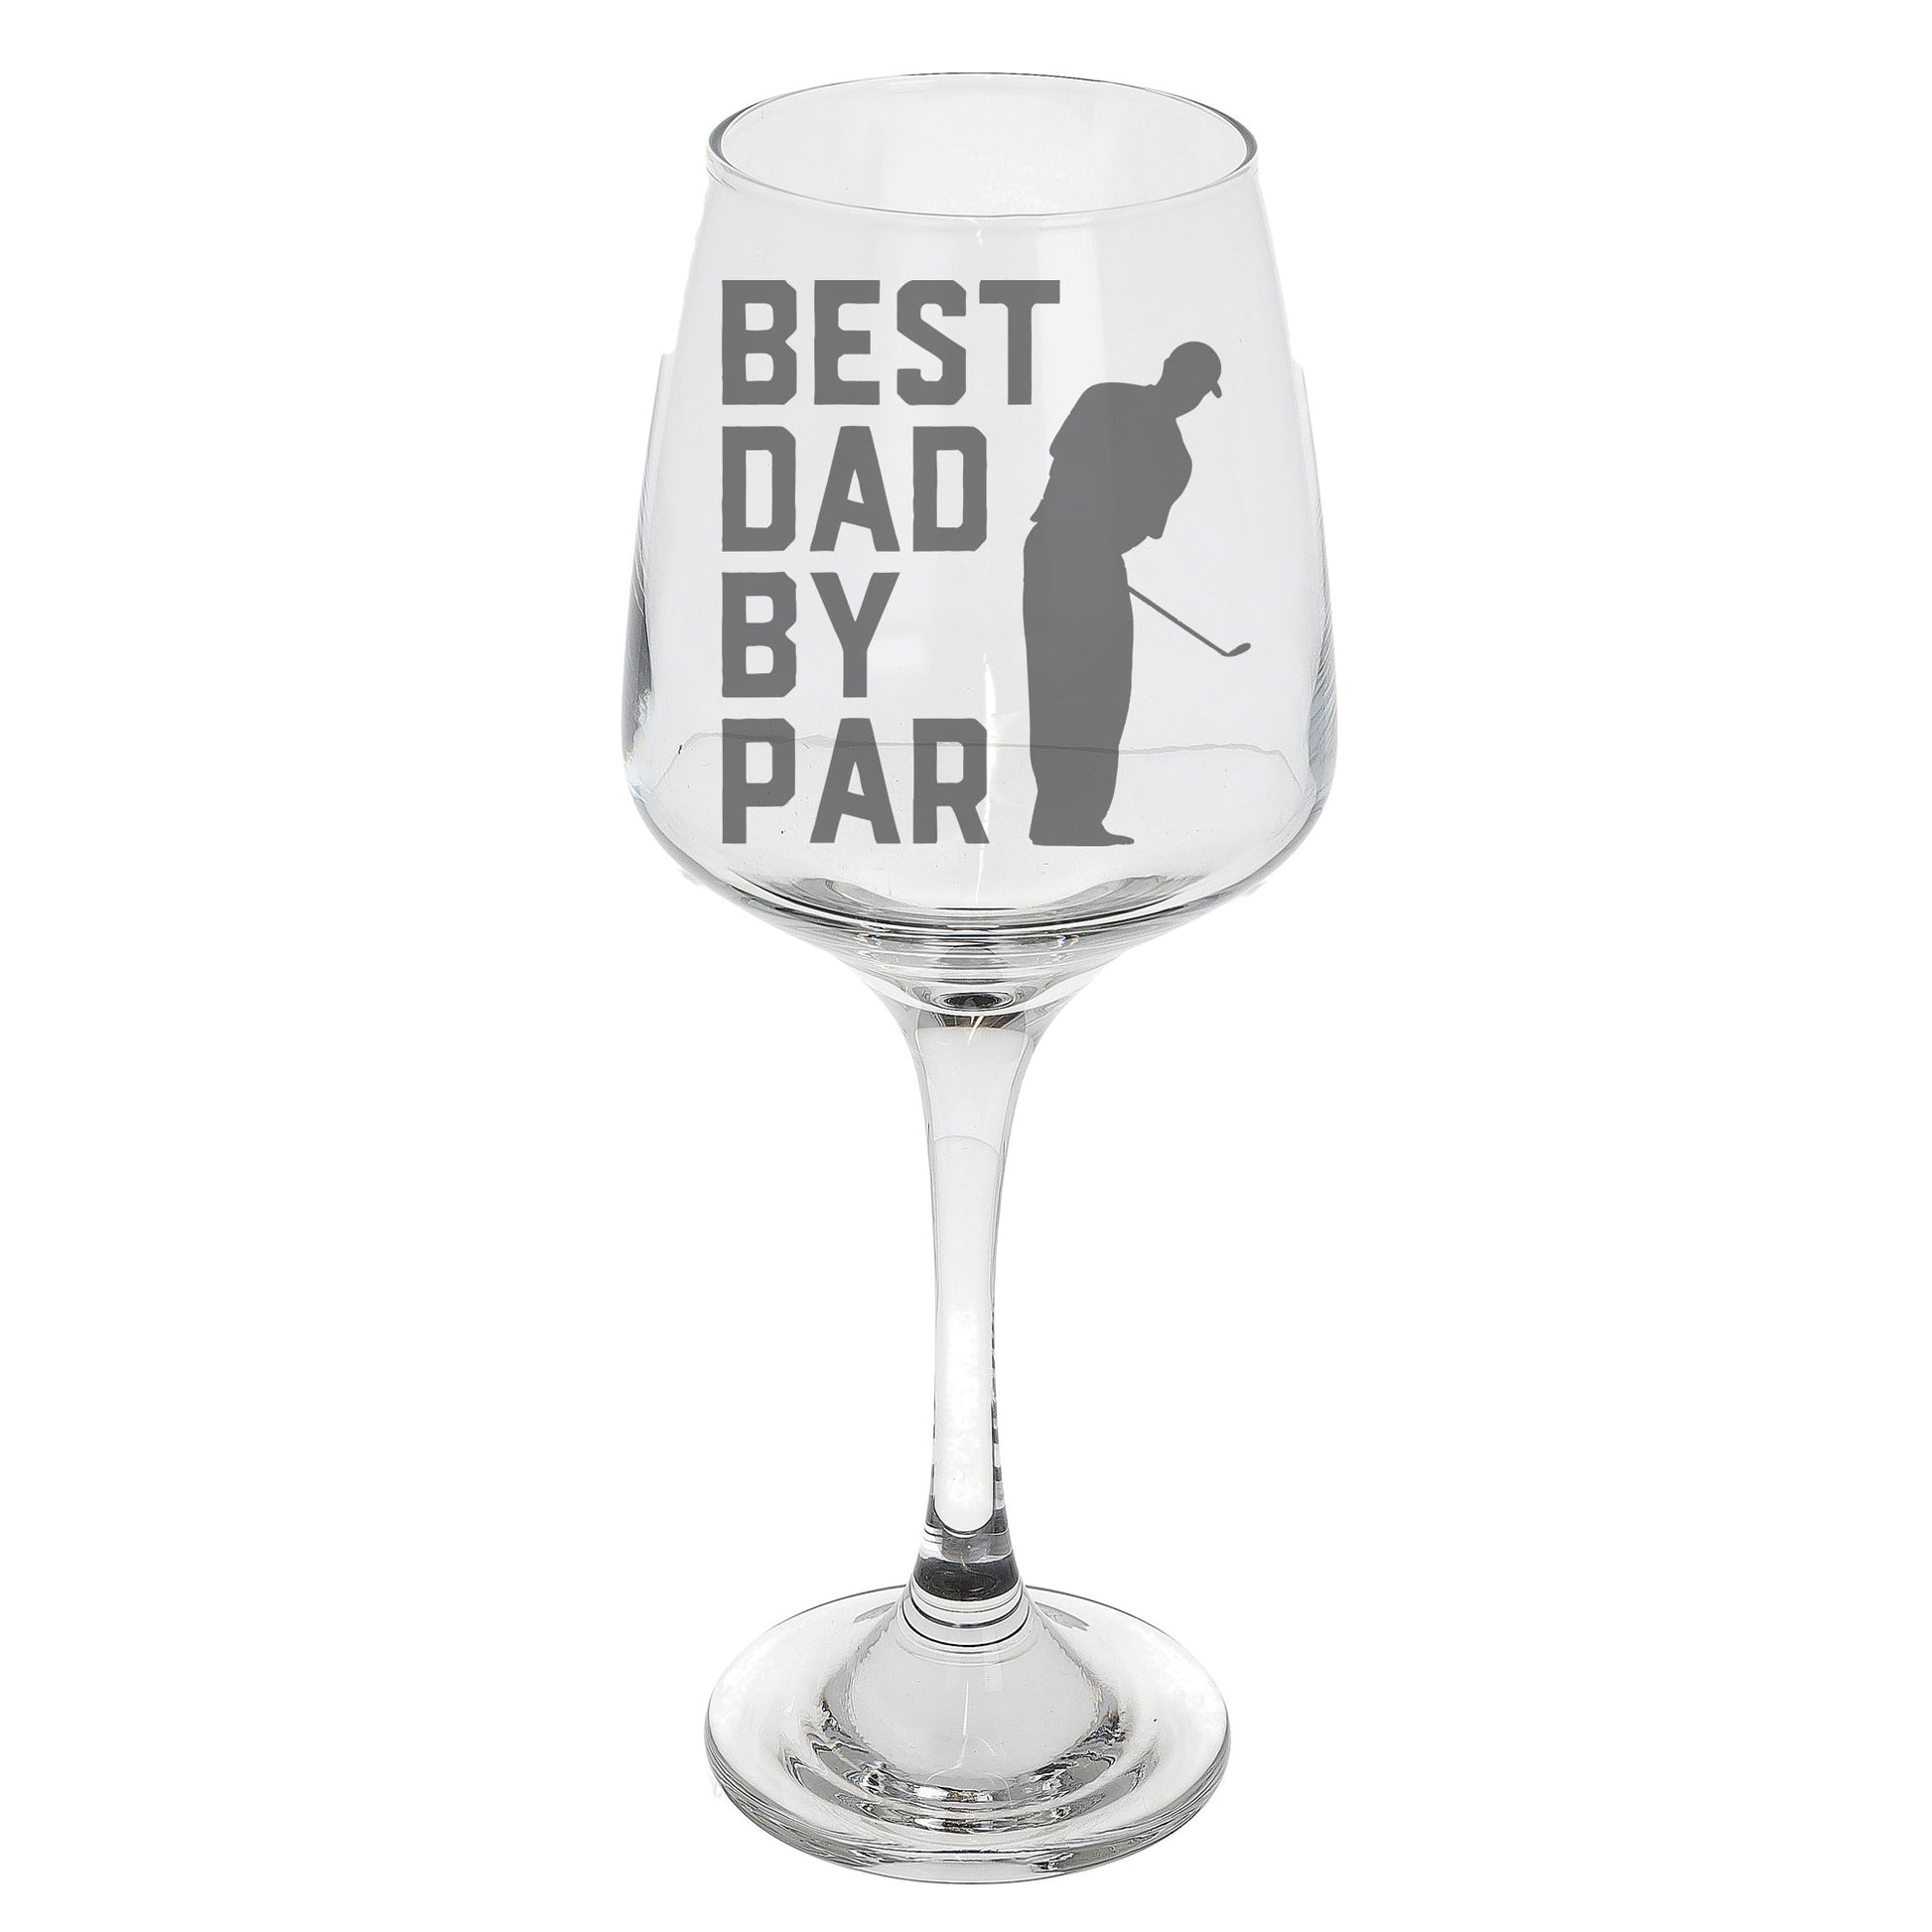 Best Dad By Par Engraved Wine Glass and/or Coaster Set  - Always Looking Good - Wine Glass Only  